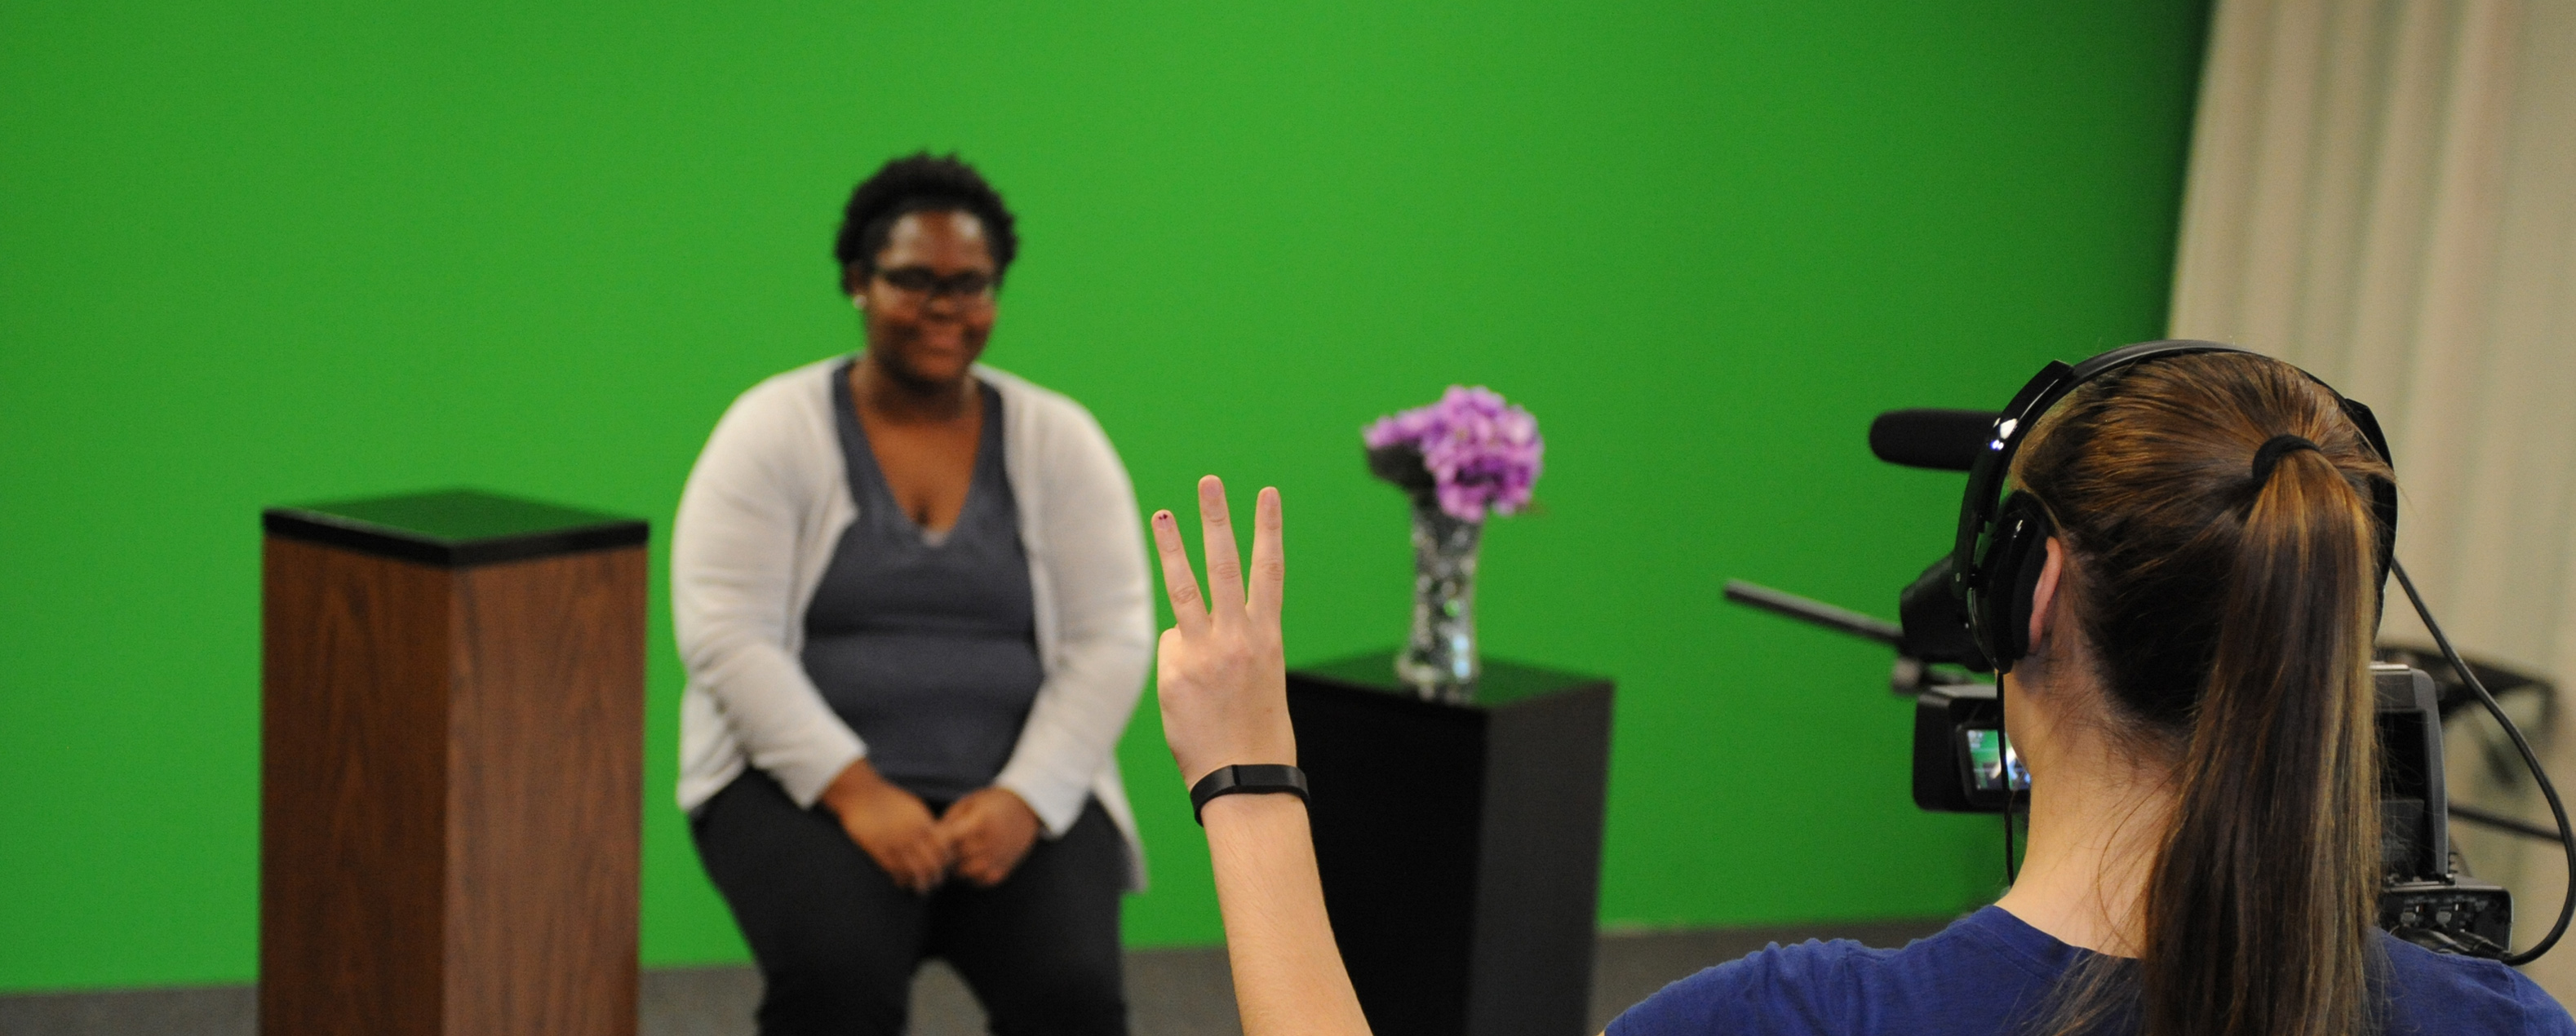 Student sitting in the background in front of a green screen. Another student is in the foreground, directing a camera at the first student and holding up three fingers in a countdown position.